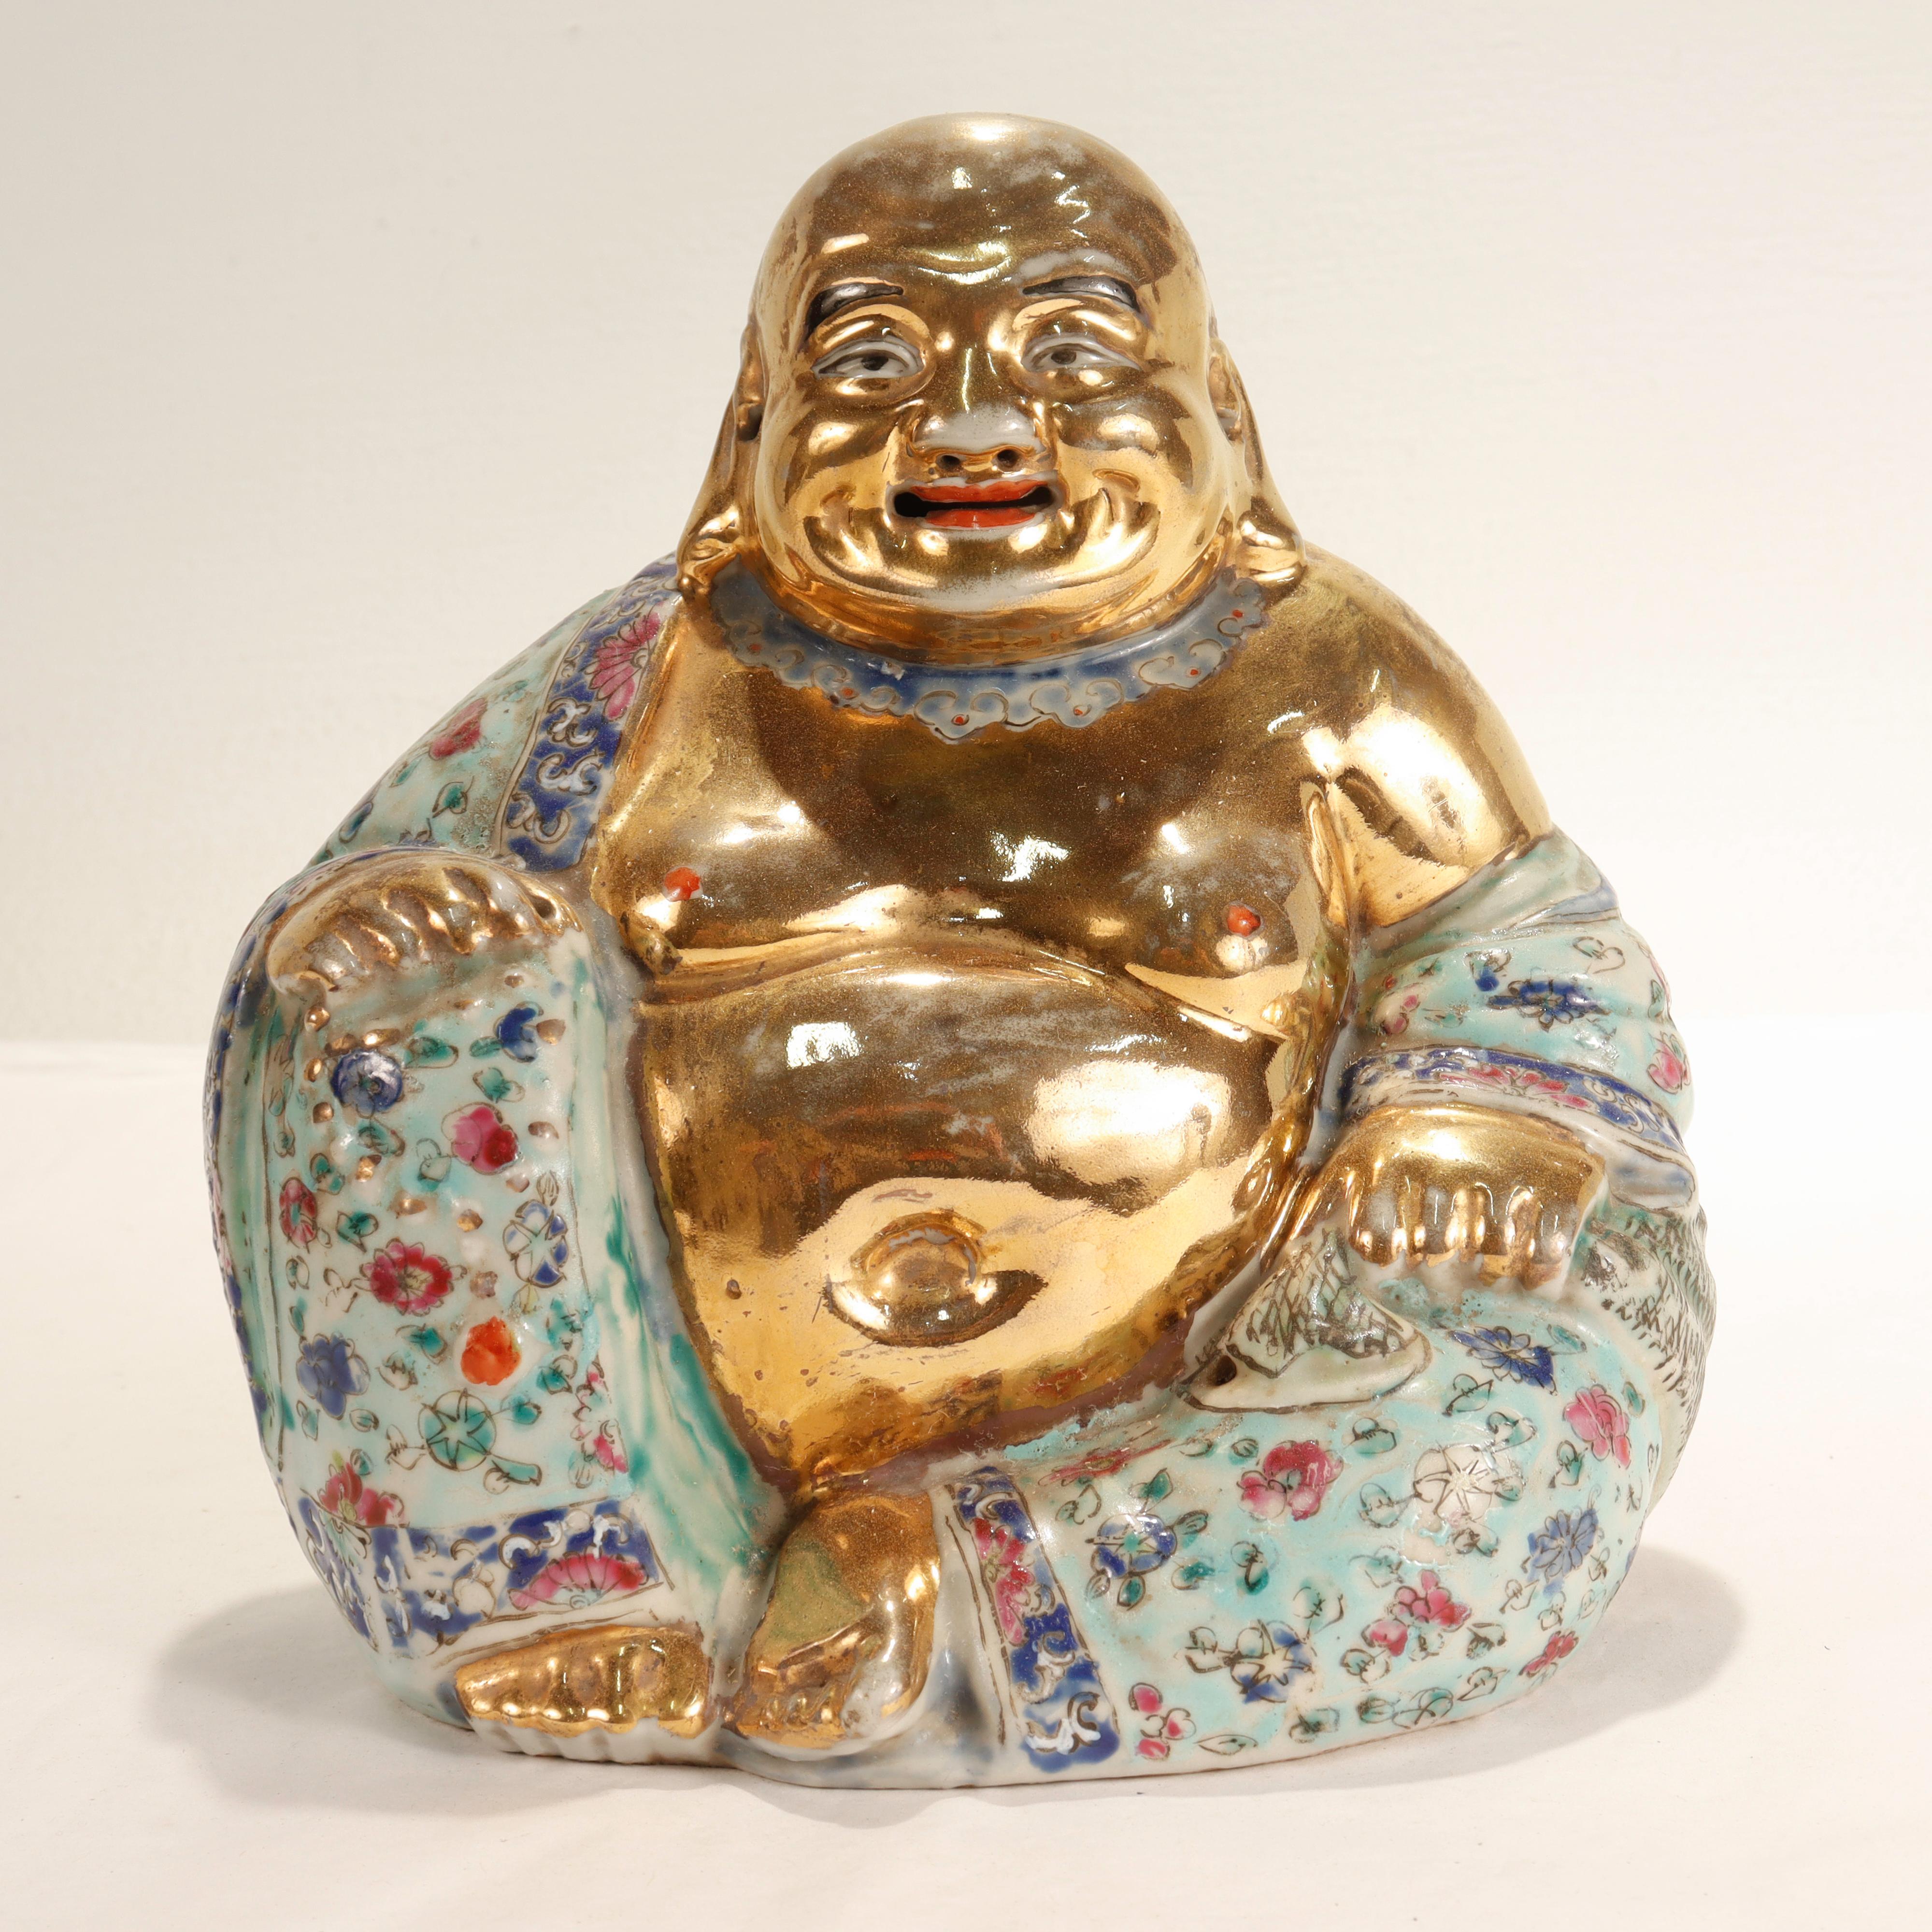 A fine vintage Chinese porcelain statue.

In the form of a Luohan or Arhat with a famille verte robe and gilt body.

The reverse retains a Lorin Marsh Ltd. sticker. 

Simply a wonderful Republic of China period porcelain Buddha!

Date:
20th